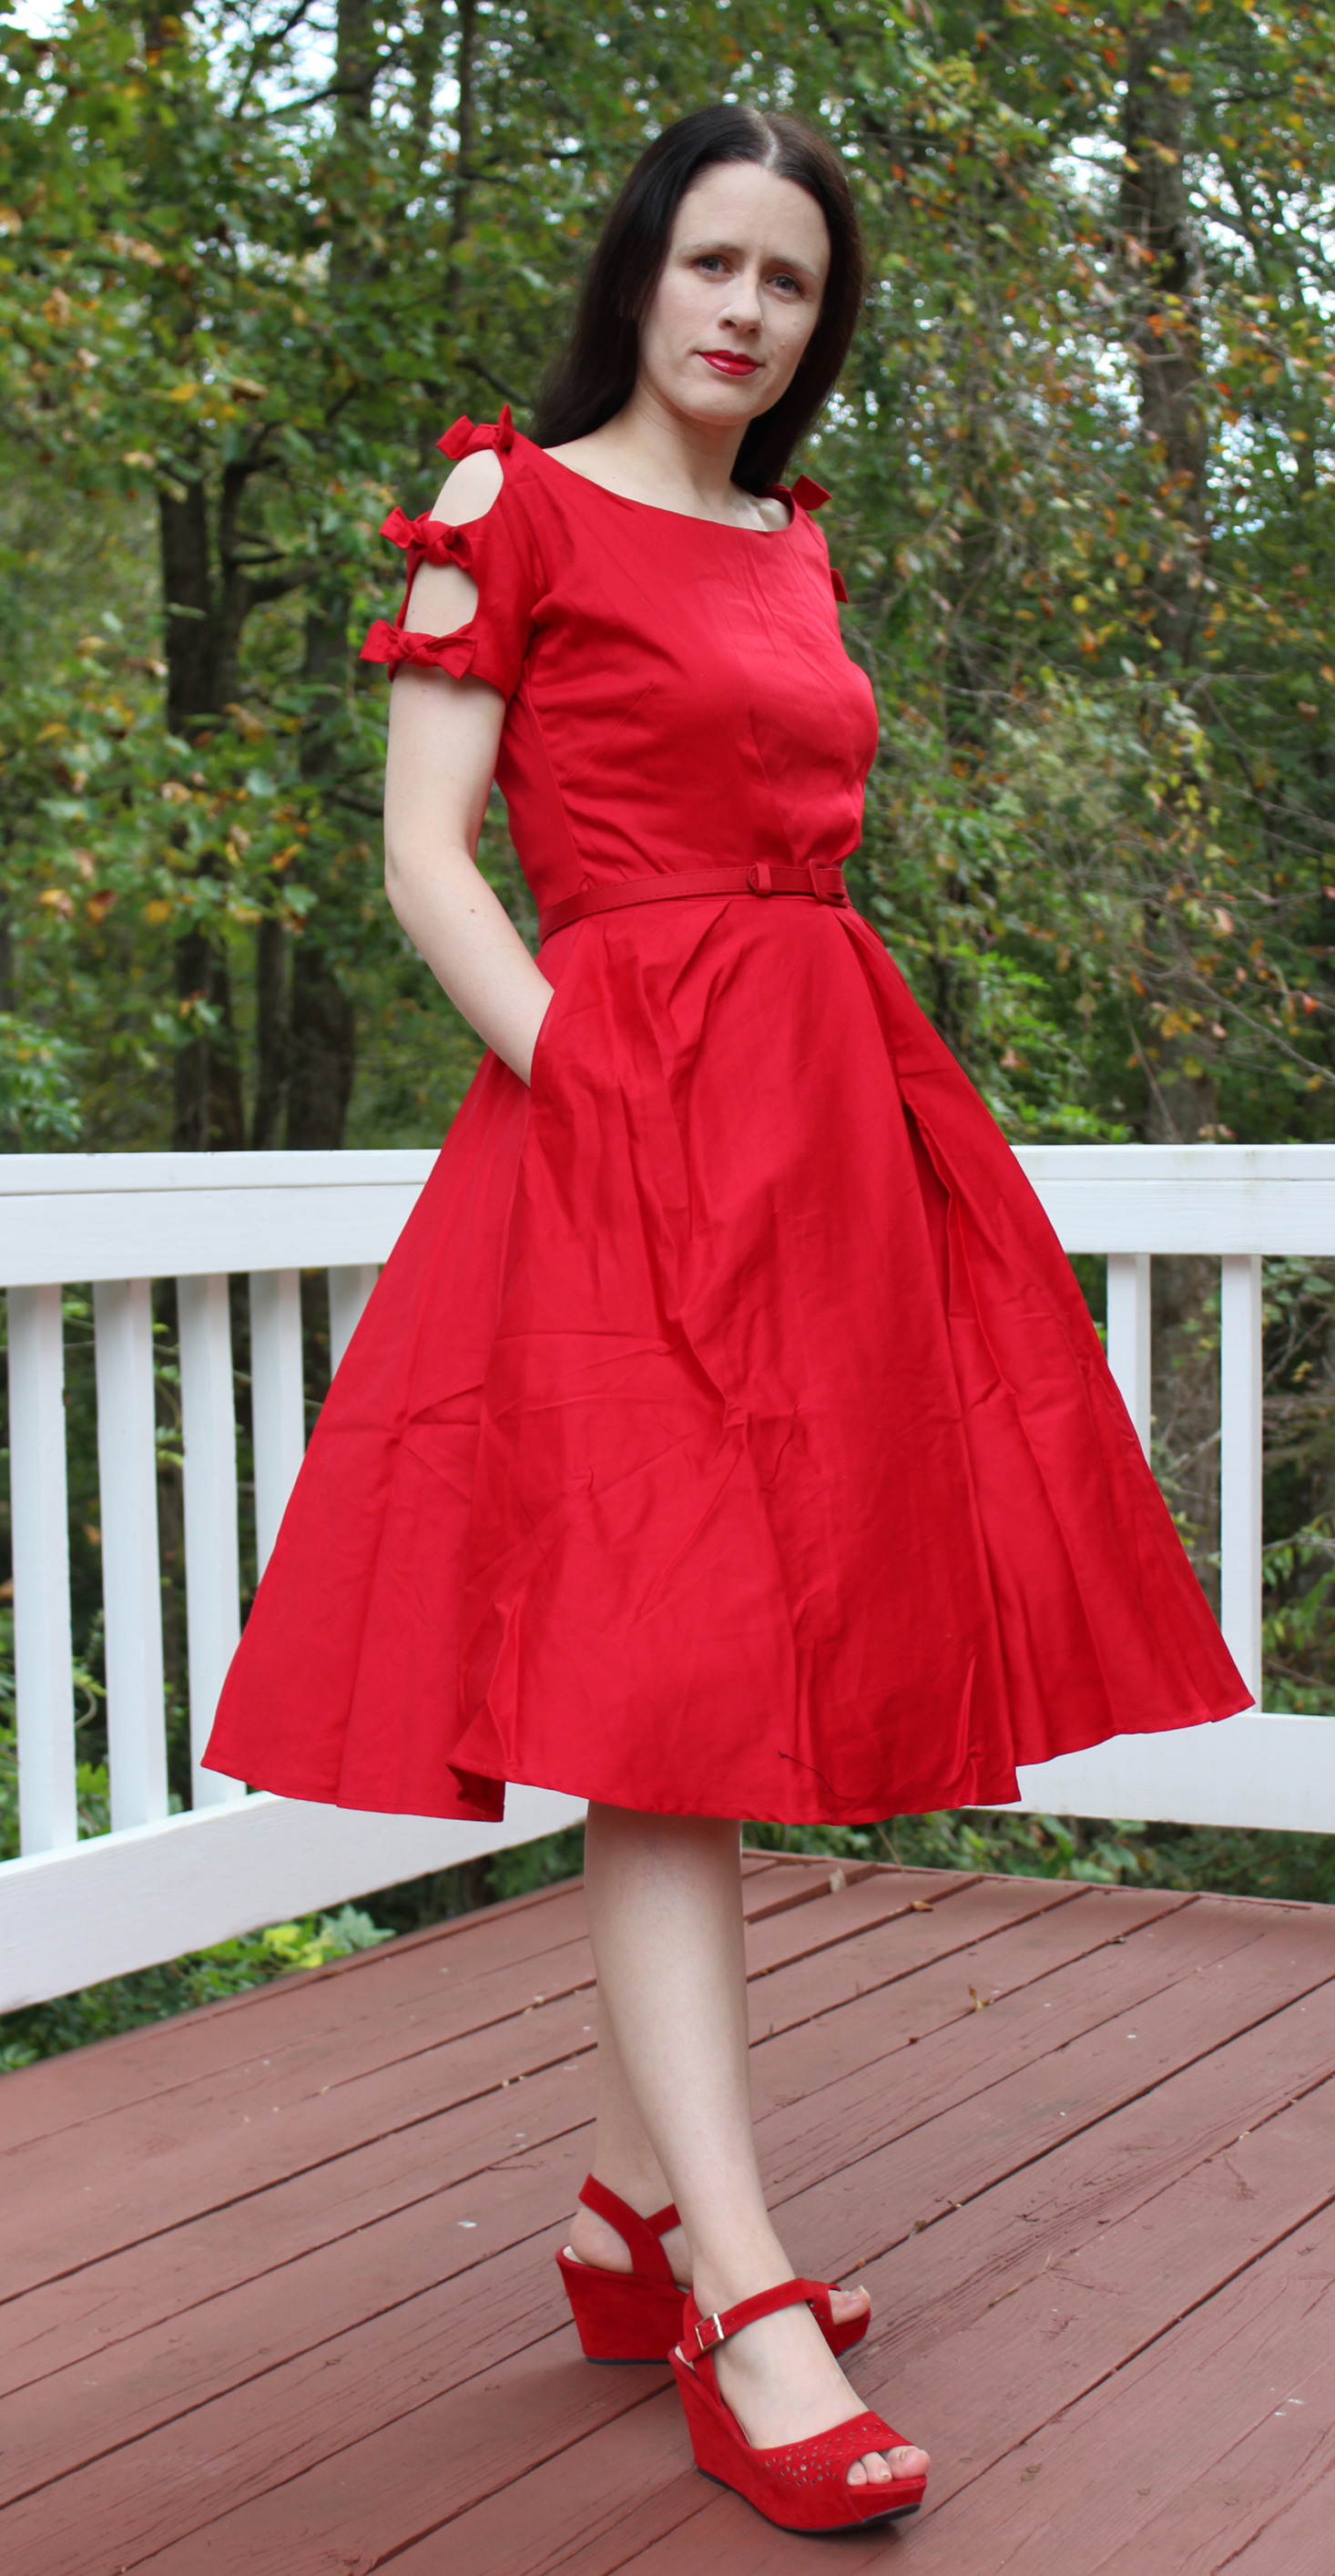 Unique Vintage Dress of The Month Club Review – October 2017